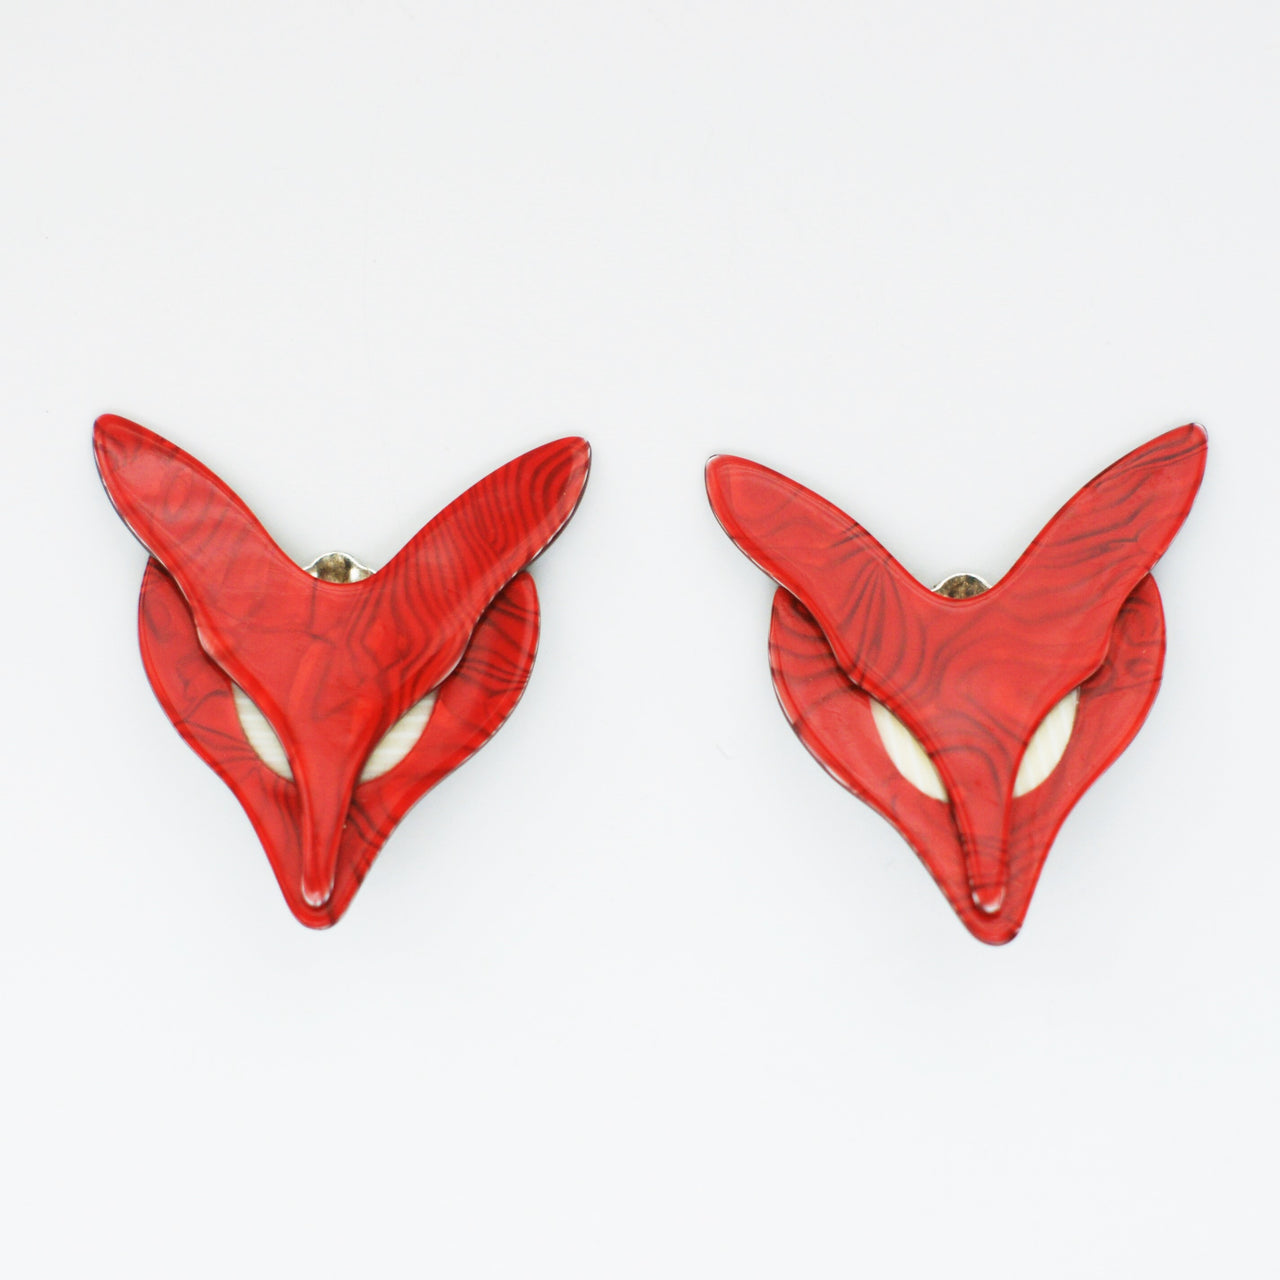 rare vintage lea stein red fox earrings on white background